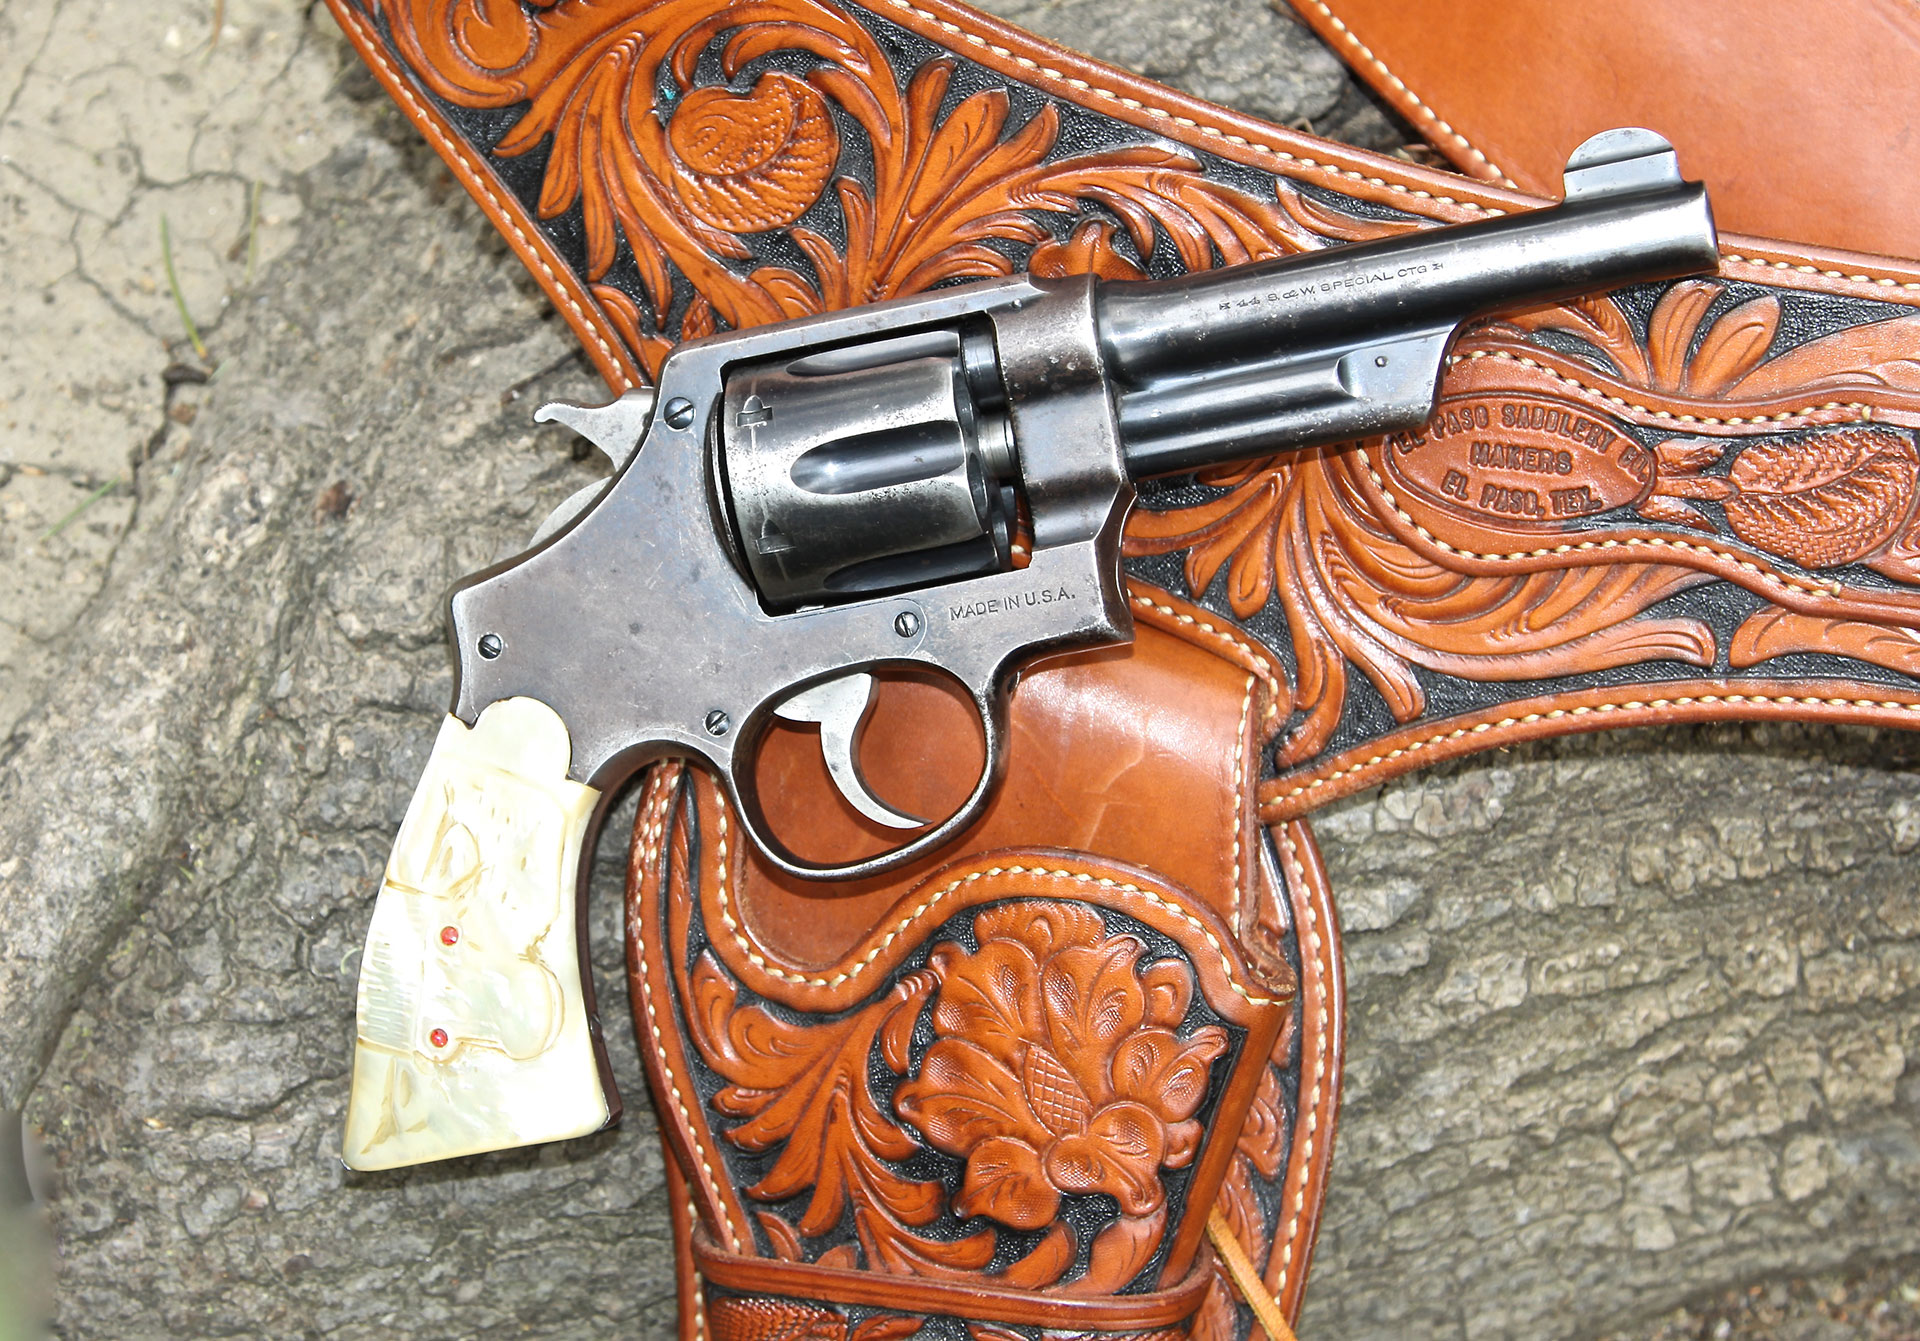 This S&W .44 Hand Ejector Third Model in .44 Special was shipped to Wolf & Klar on June 29, 1928 for a wholesale price of $21.90; it retailed for $36.50. The W&K carved steer head grips with ruby eyes (shown) set the buyer back another $12 (gold horns and nose rings cost slightly more). Appropriately, the ‘Smith is shown with a carved buscadero rig from El Paso Saddlery.